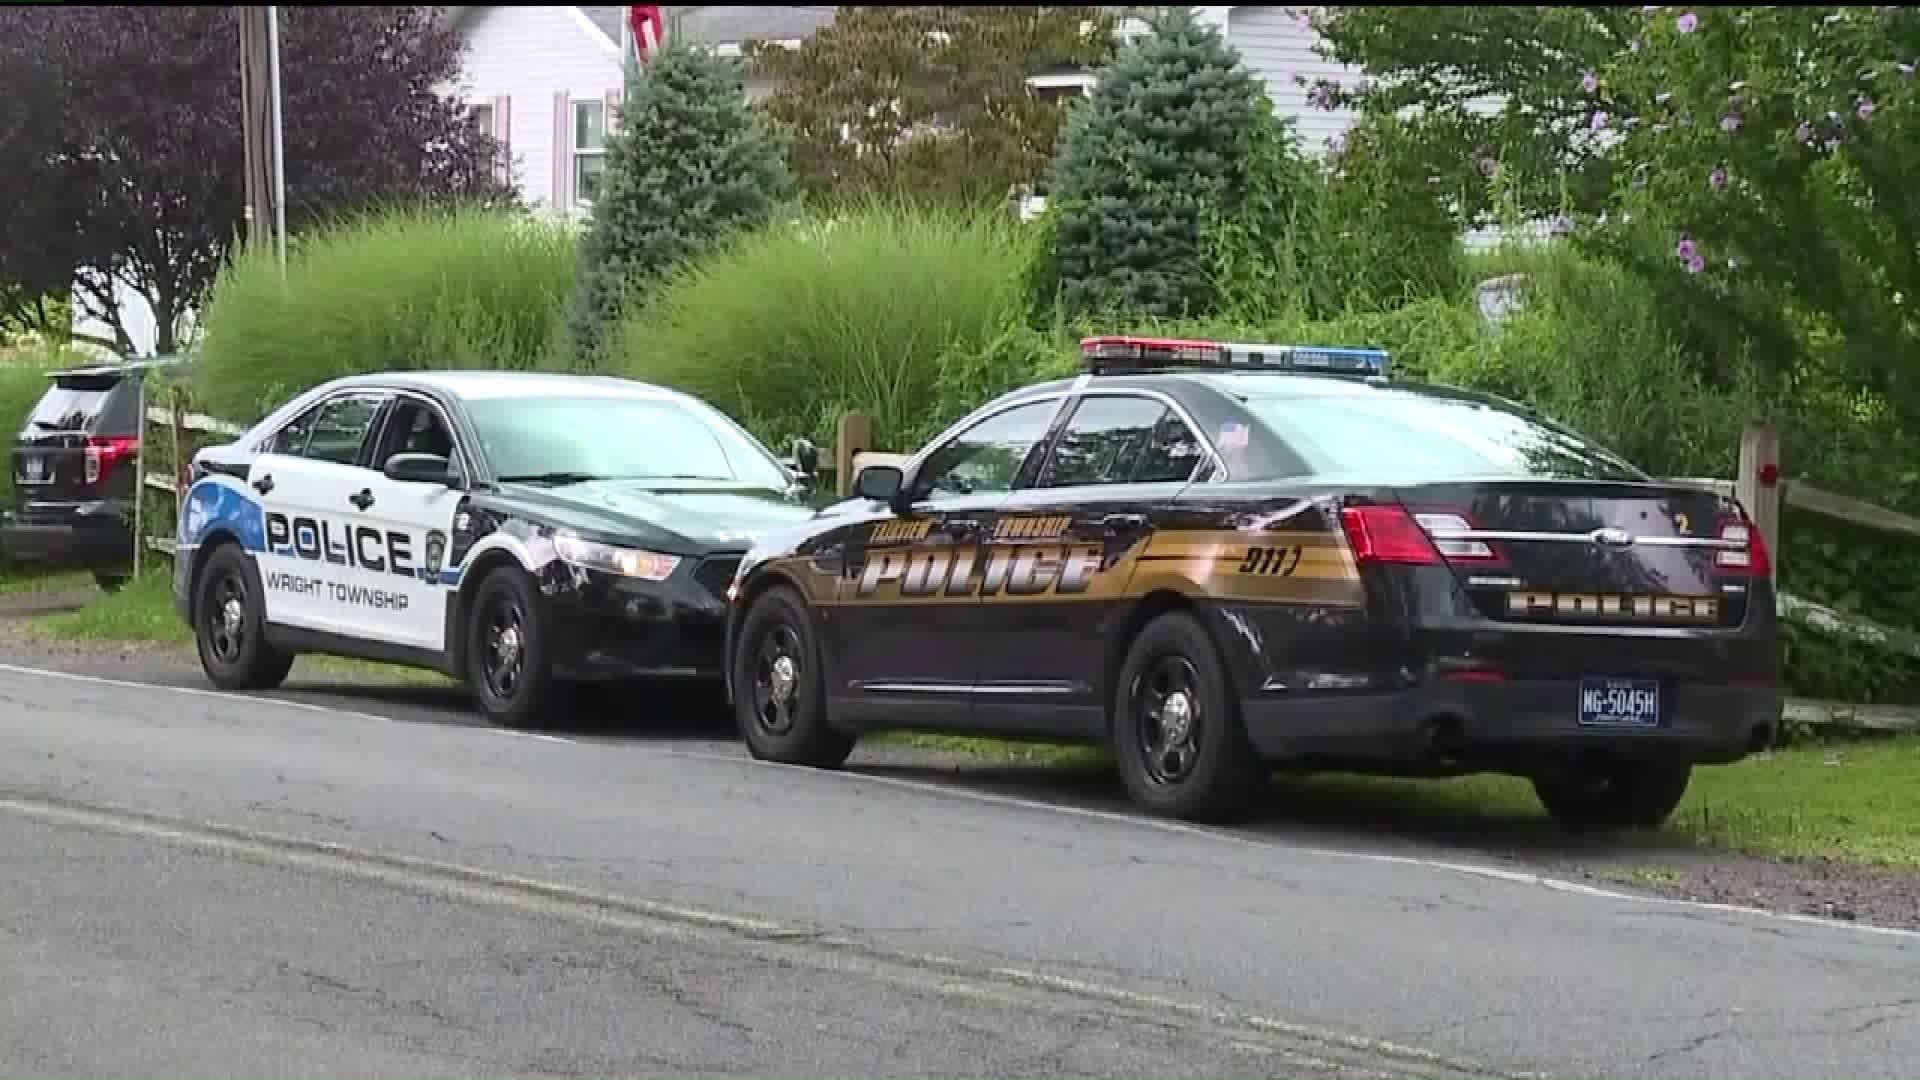 Couple Found Dead Inside Home in Luzerne County